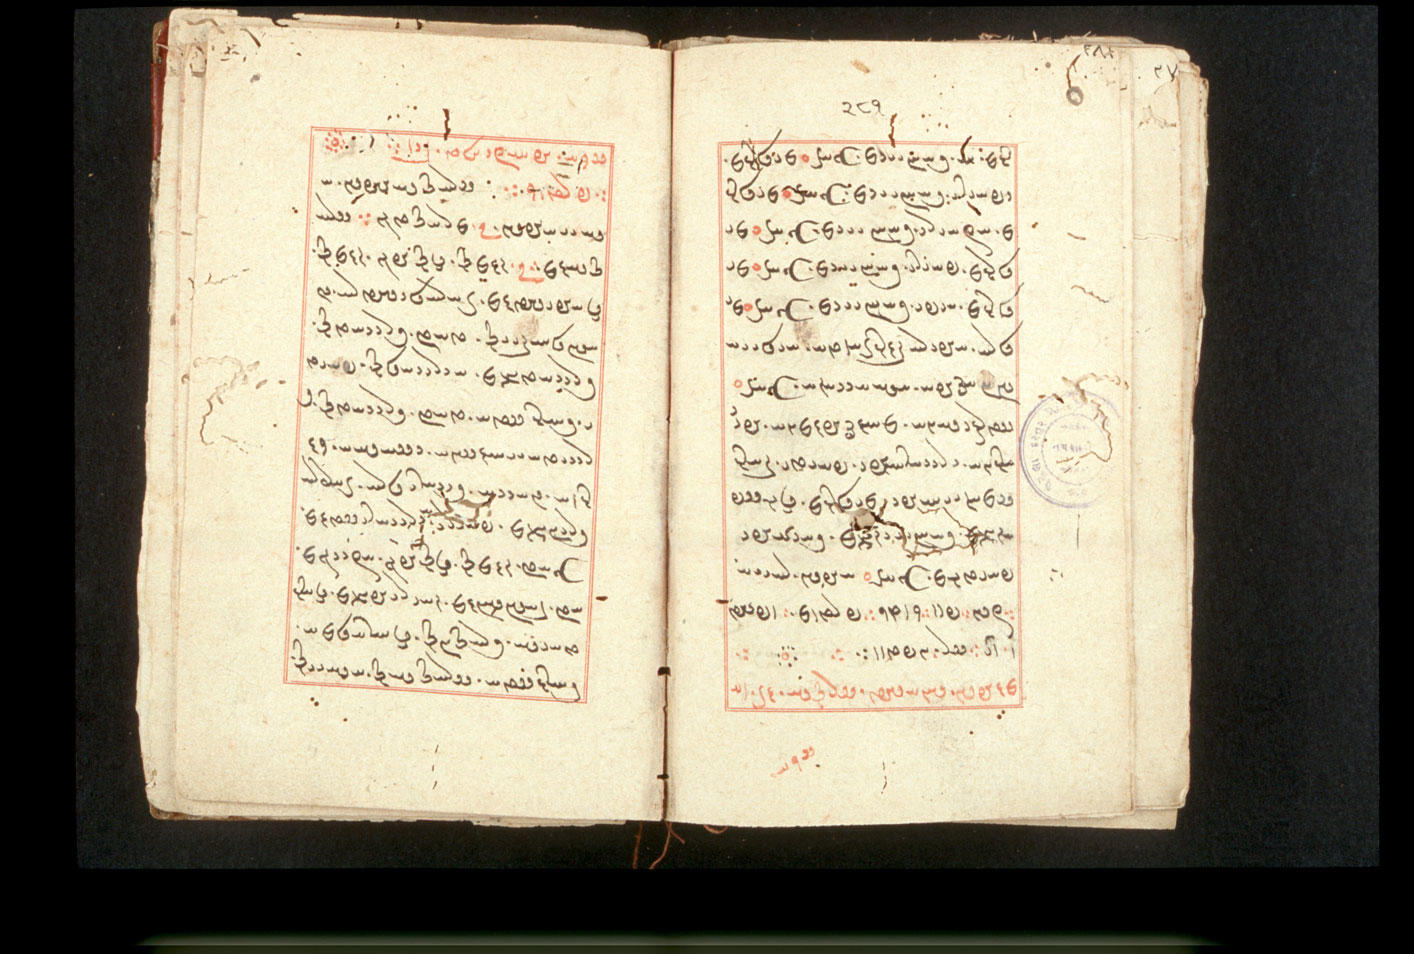 Folios 281v (right) and 282r (left)